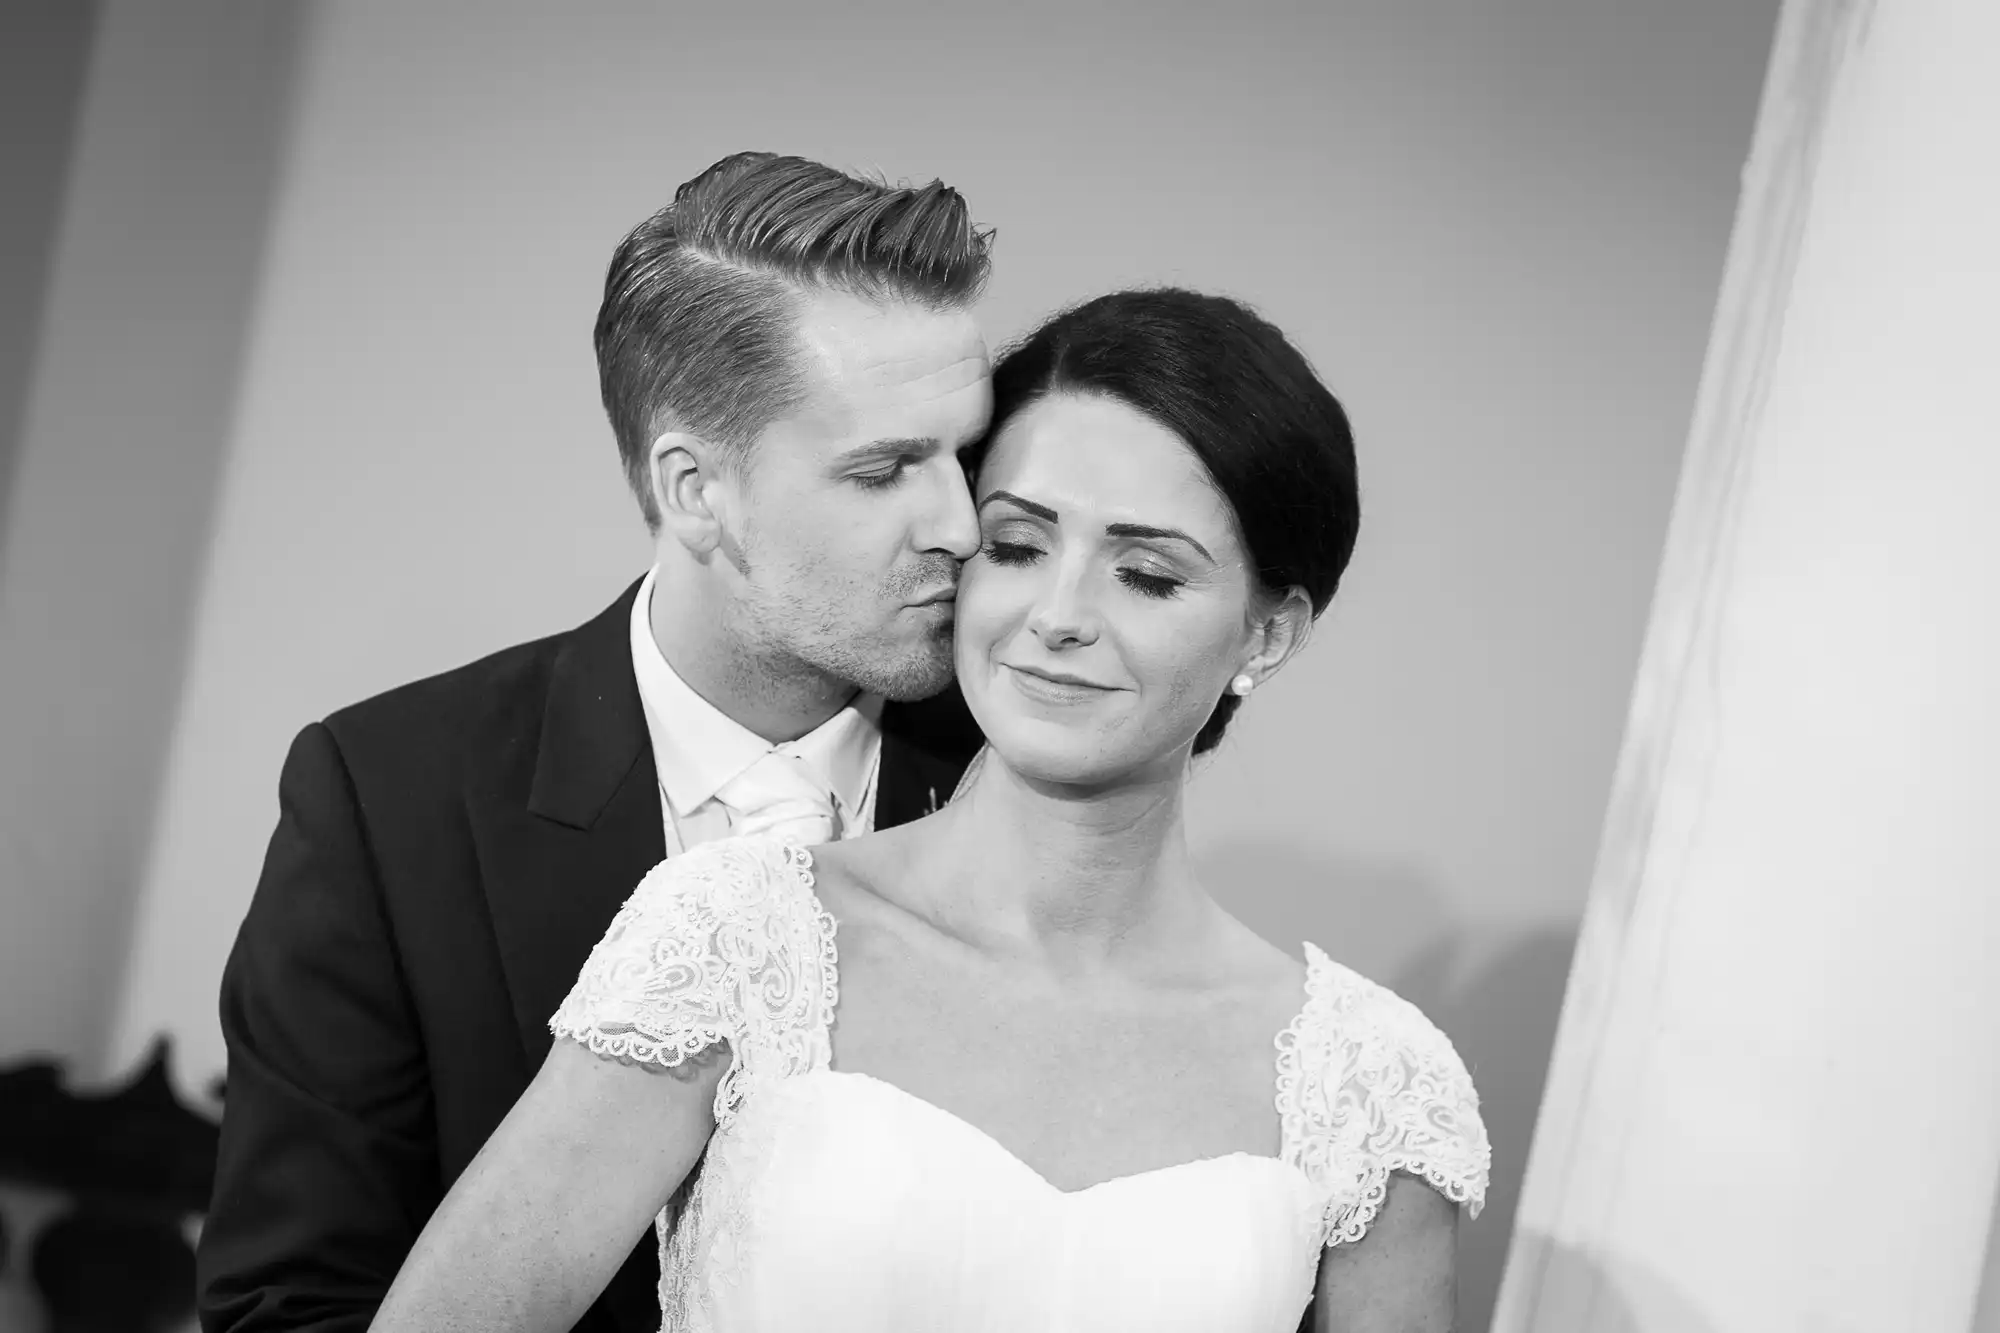 A black and white photo of a groom kissing the bride on the cheek, both dressed in wedding attire with tender expressions.